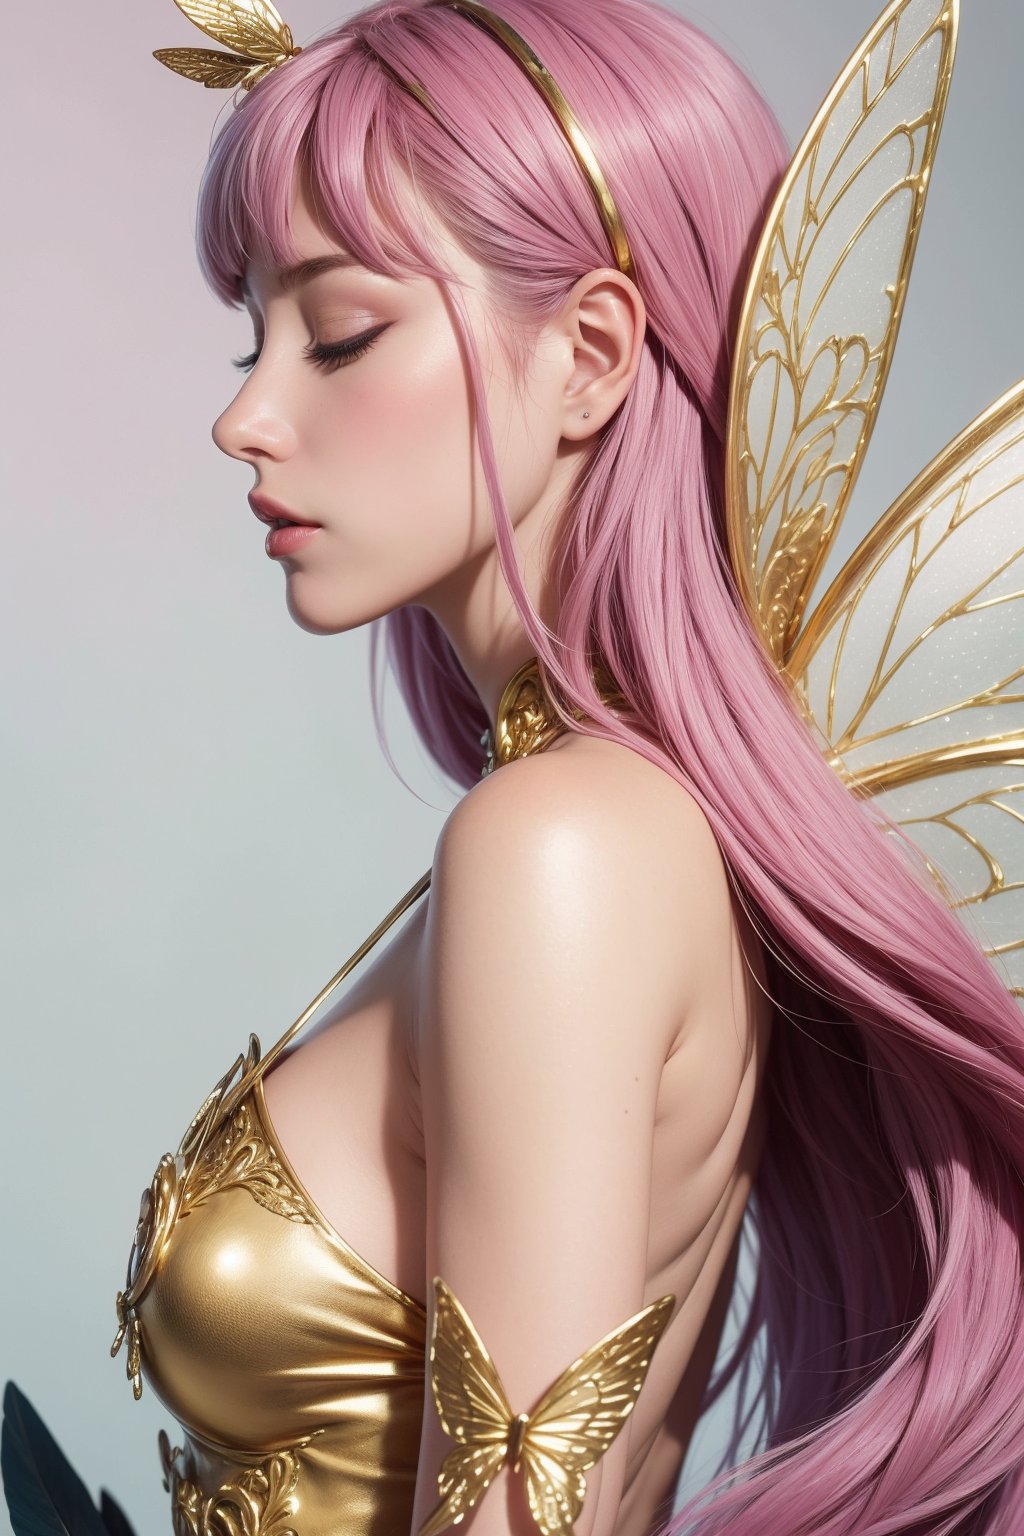 A close-up image of a fairy-like figure with ethereal beauty wearing a whimsical hat, bathed in a gentle glow. The fairy has their eyes closed, showing a serene expression, and their hair blends into an intricate wing structure that outlines their profile. The wings are adorned with a tapestry of feathers, transitioning from pastel to vibrant hues of purples, pinks, and golds. Each feather is detailed, achieving a texture that is both realistic and otherworldly. Light dots and small butterfly motifs are scattered across the wings and background, creating a magical dust or bokeh effect.